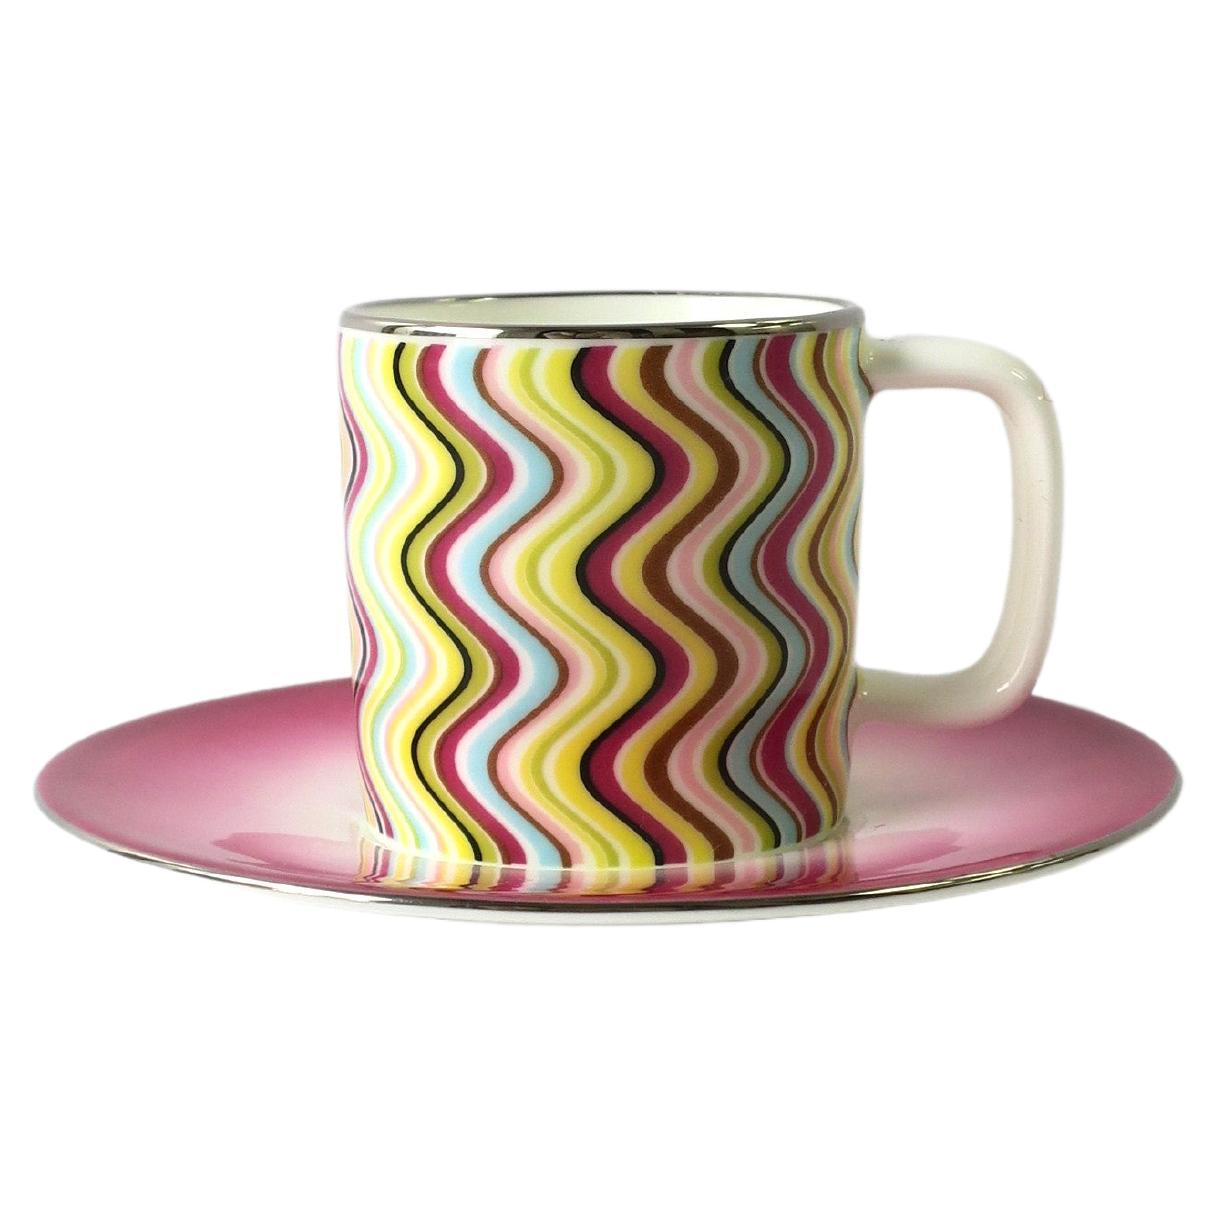 Missoni Italian Porcelain Coffee Espresso Cup and Saucer